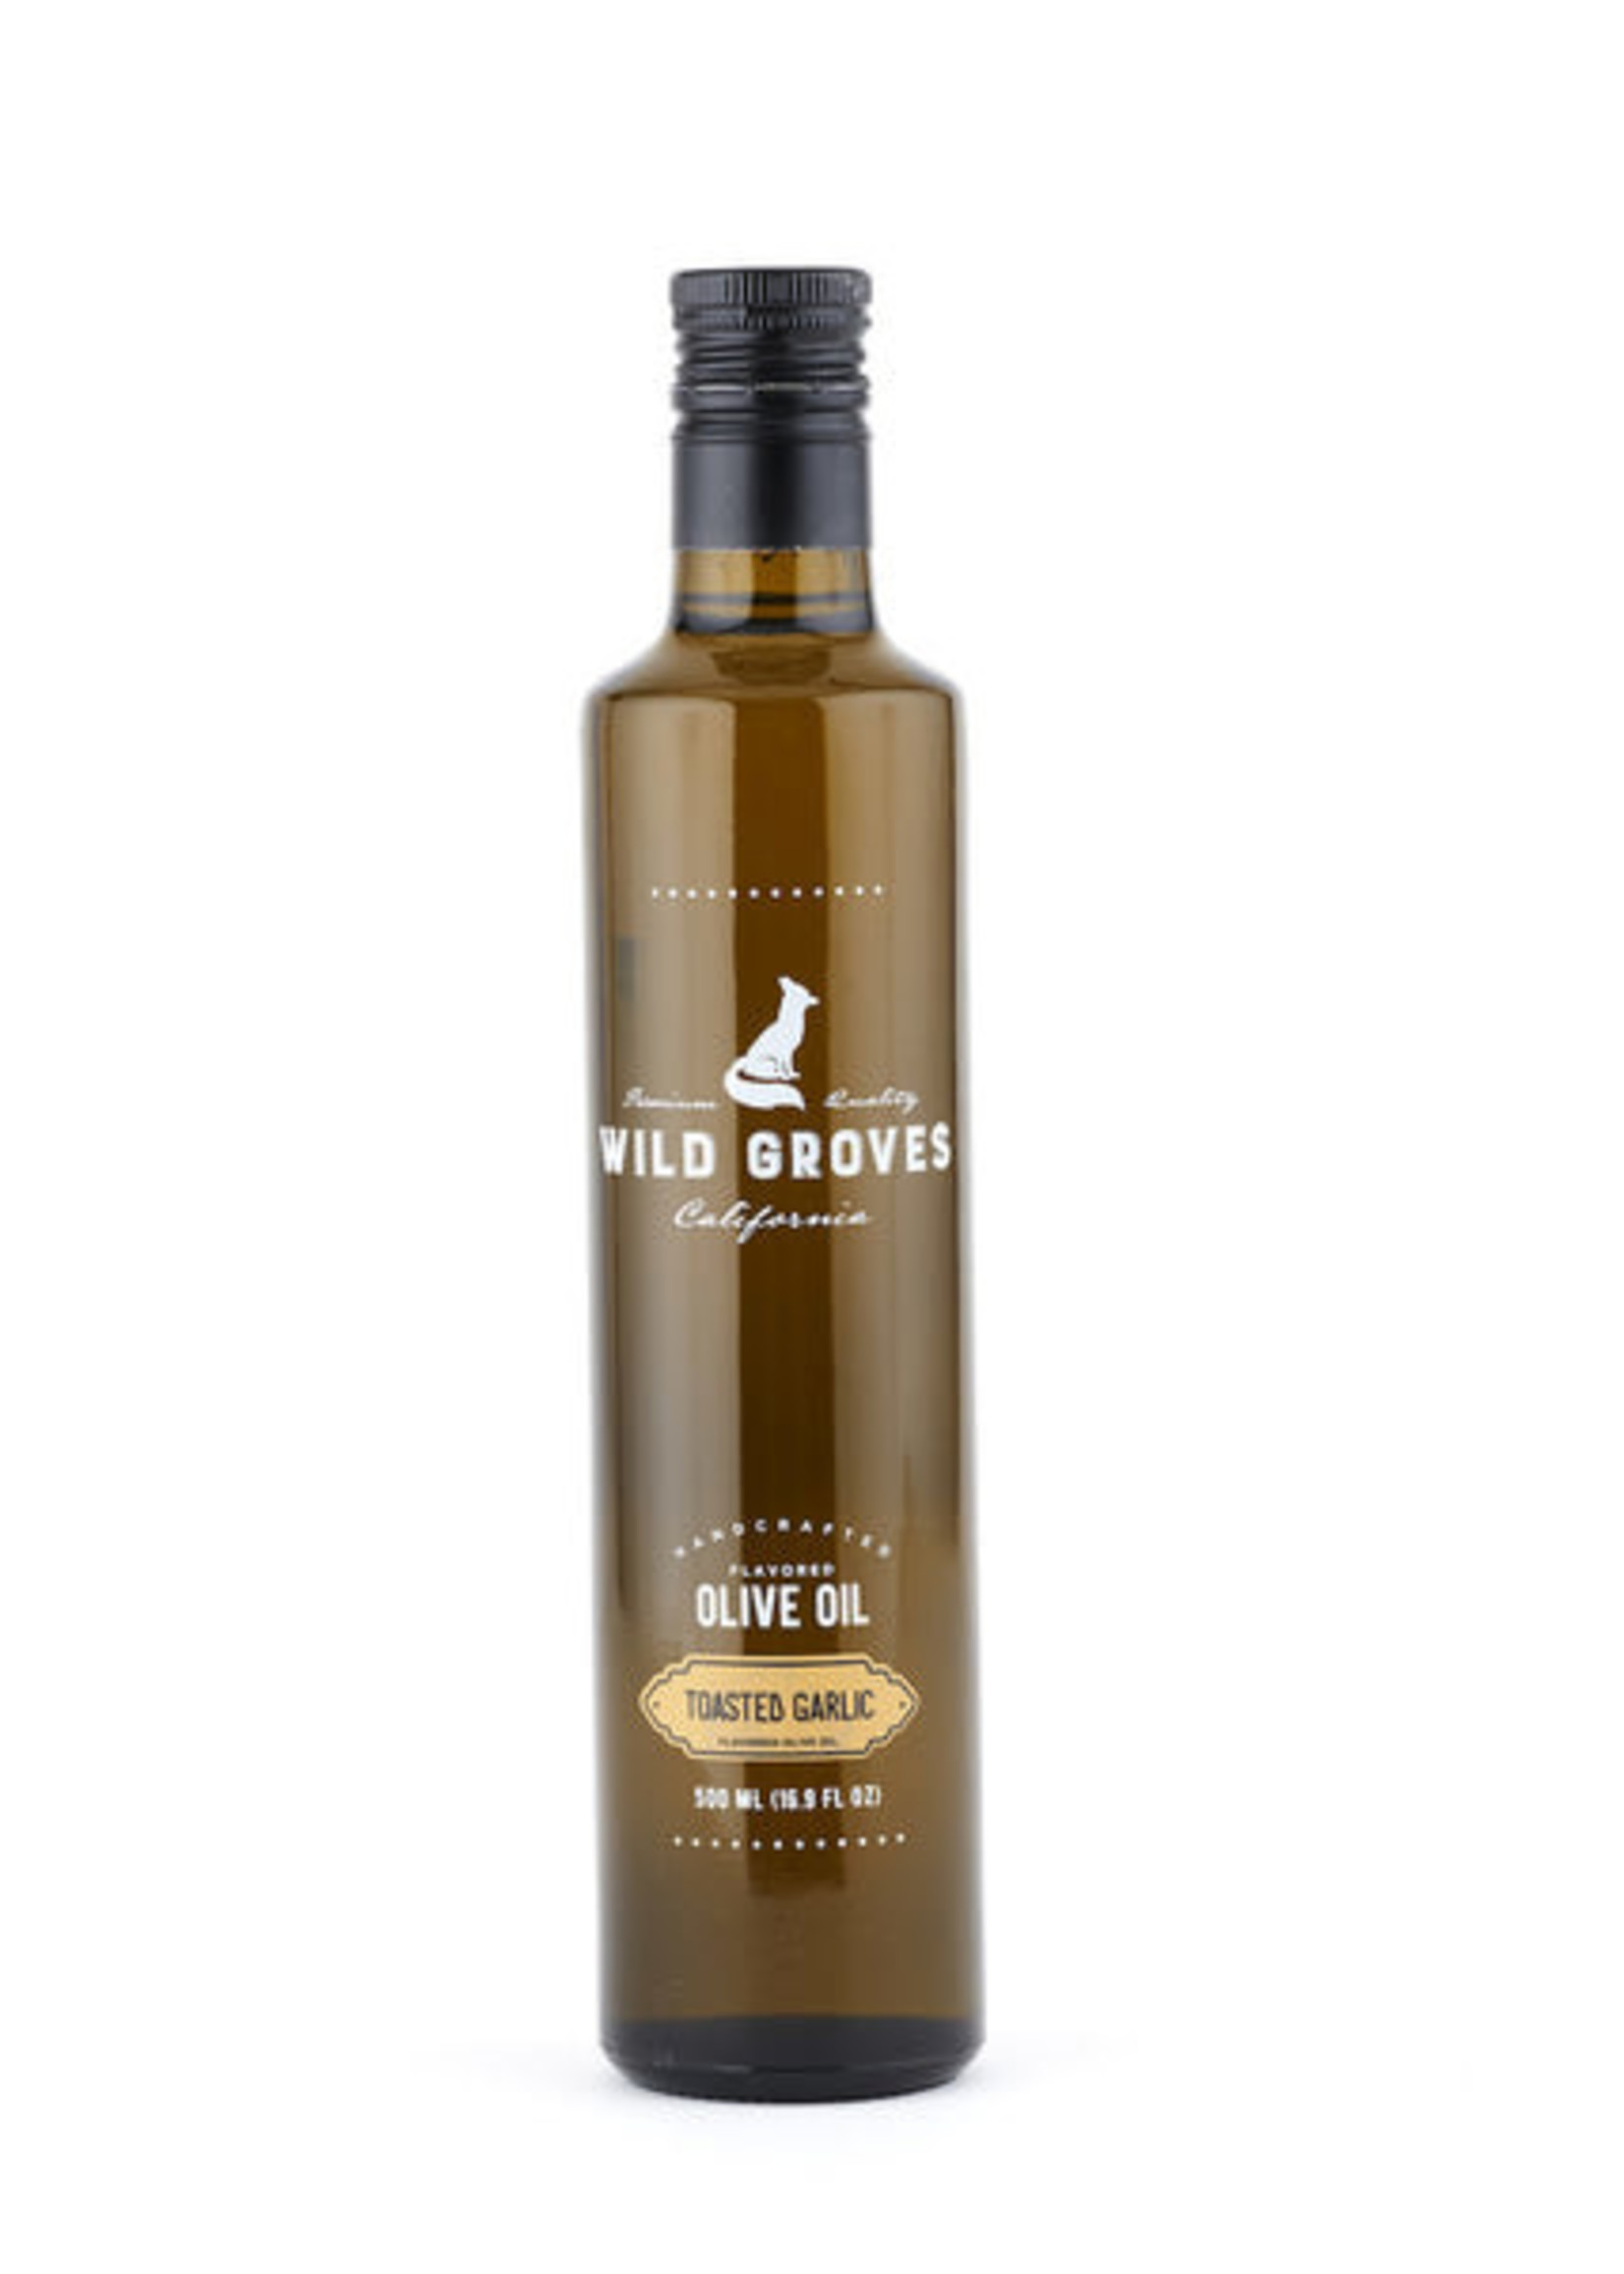 Wild Groves Wild Groves Toasted Garlic Olive Oil